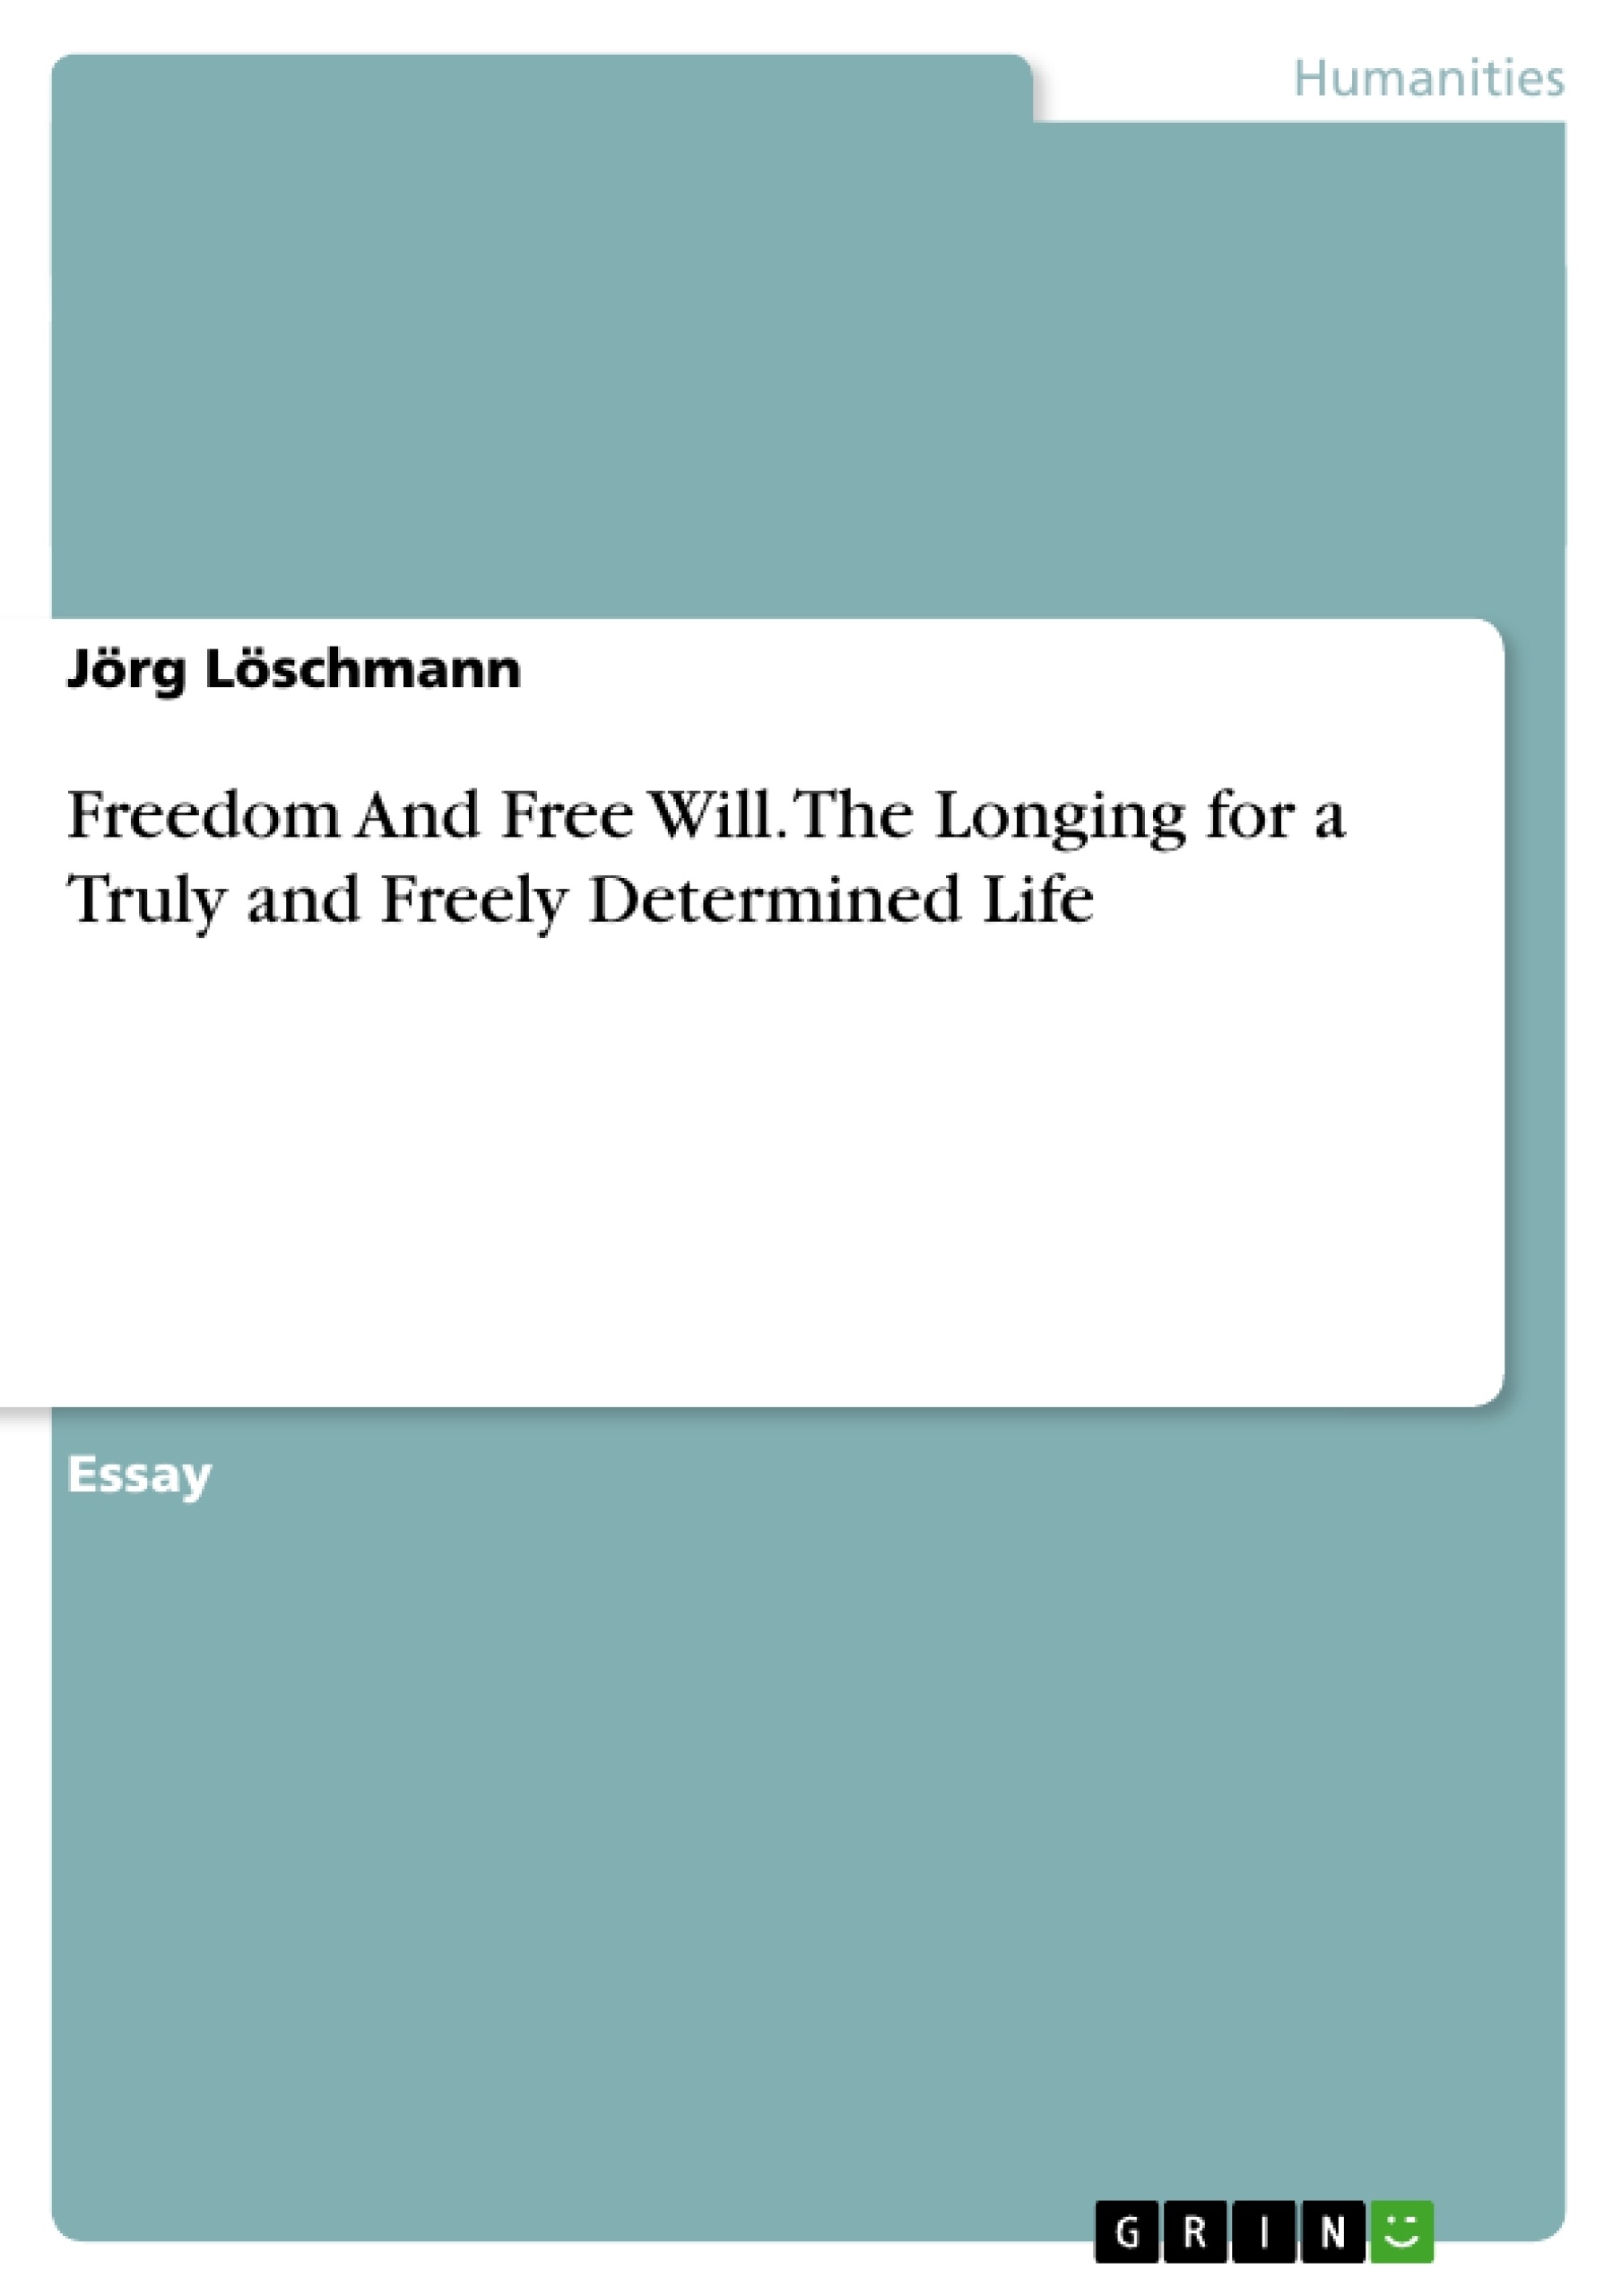 Titel: Freedom And Free Will. The Longing for a Truly and Freely Determined Life